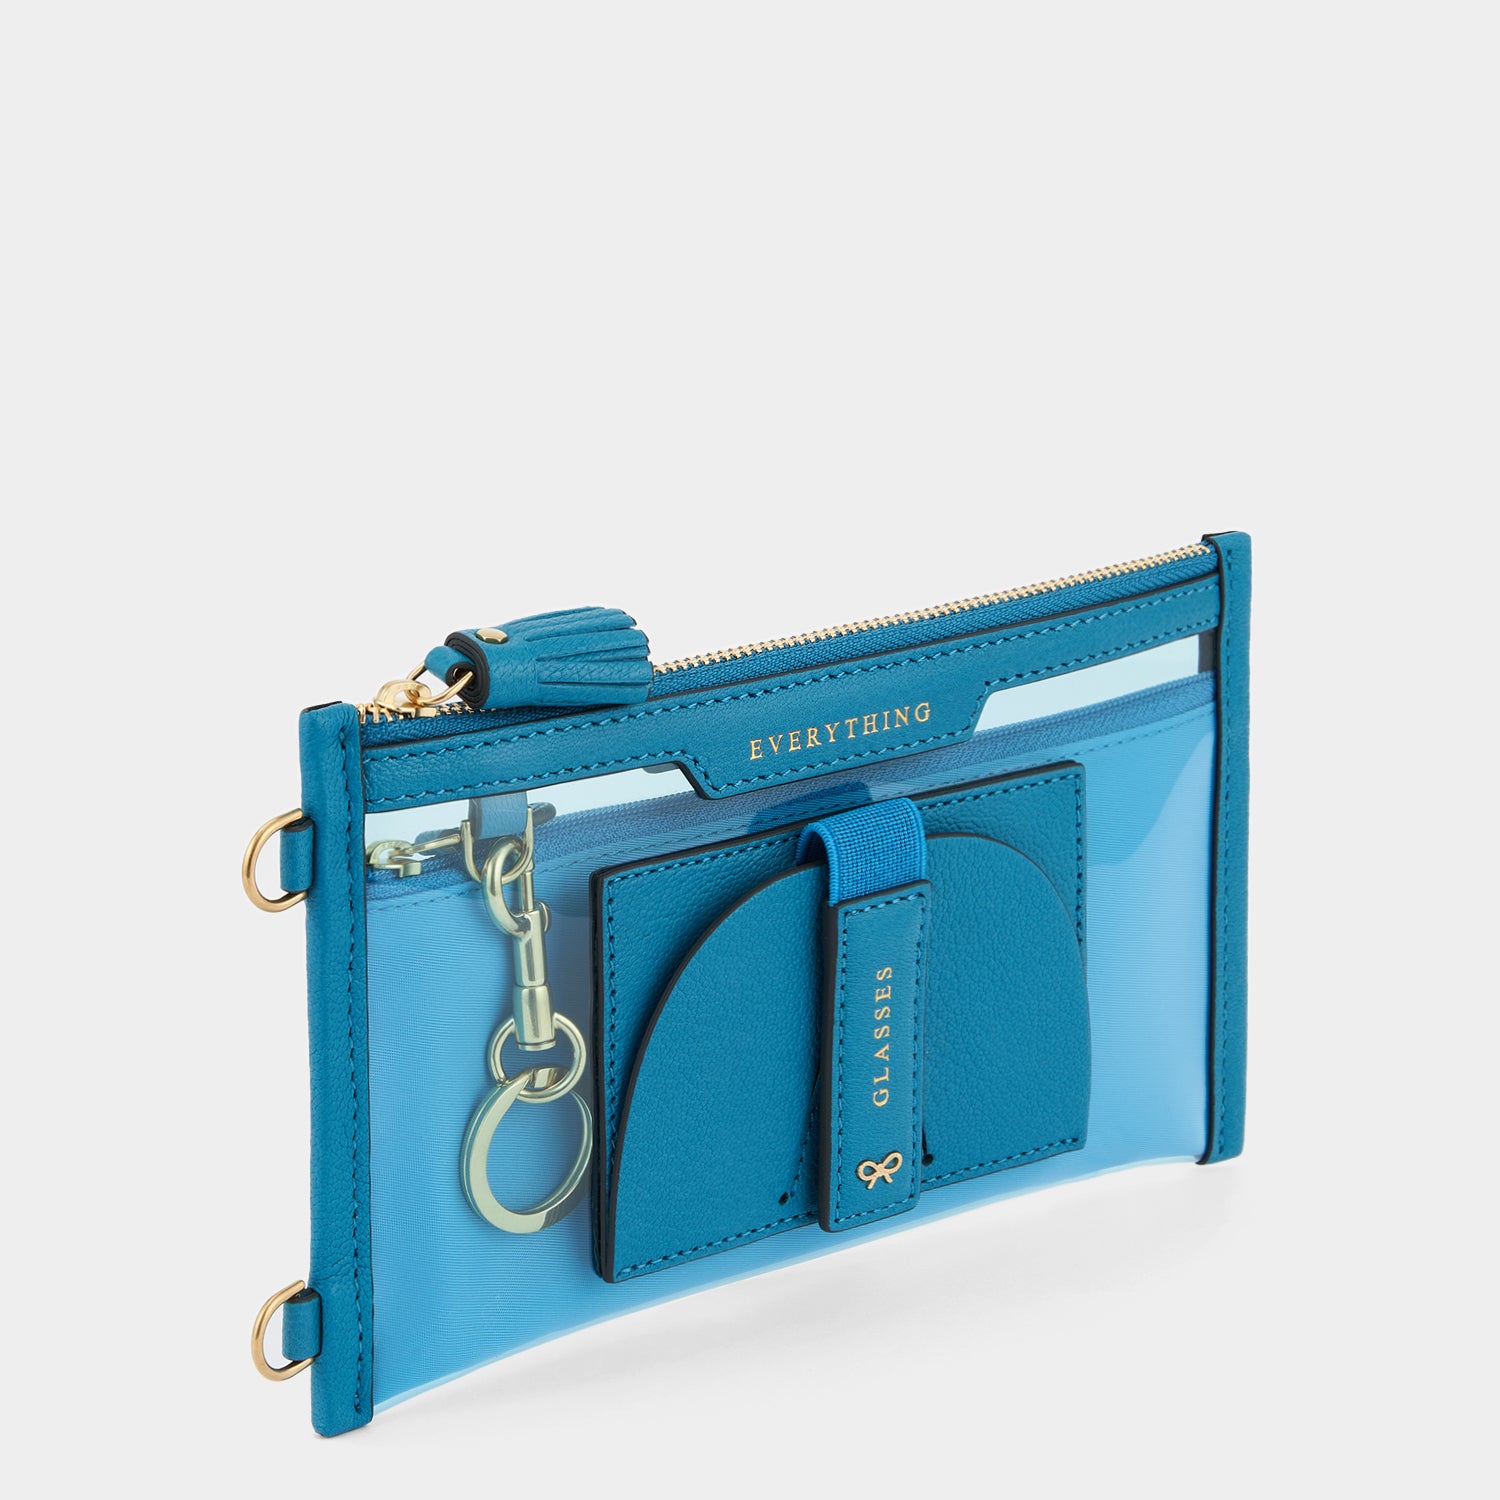 Everything Pouch | Anya Hindmarch UK